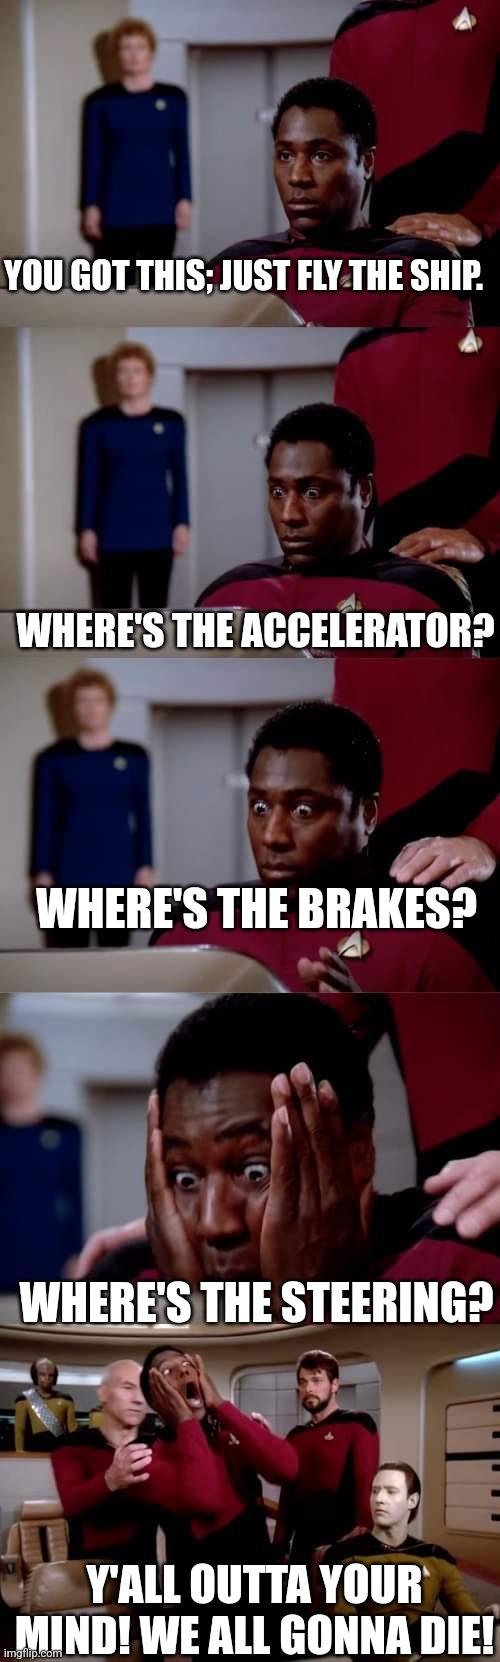 Rocket science | YOU GOT THIS; JUST FLY THE SHIP. WHERE'S THE ACCELERATOR? WHERE'S THE BRAKES? WHERE'S THE STEERING? Y'ALL OUTTA YOUR MIND! WE ALL GONNA DIE! | image tagged in star trek tng | made w/ Imgflip meme maker